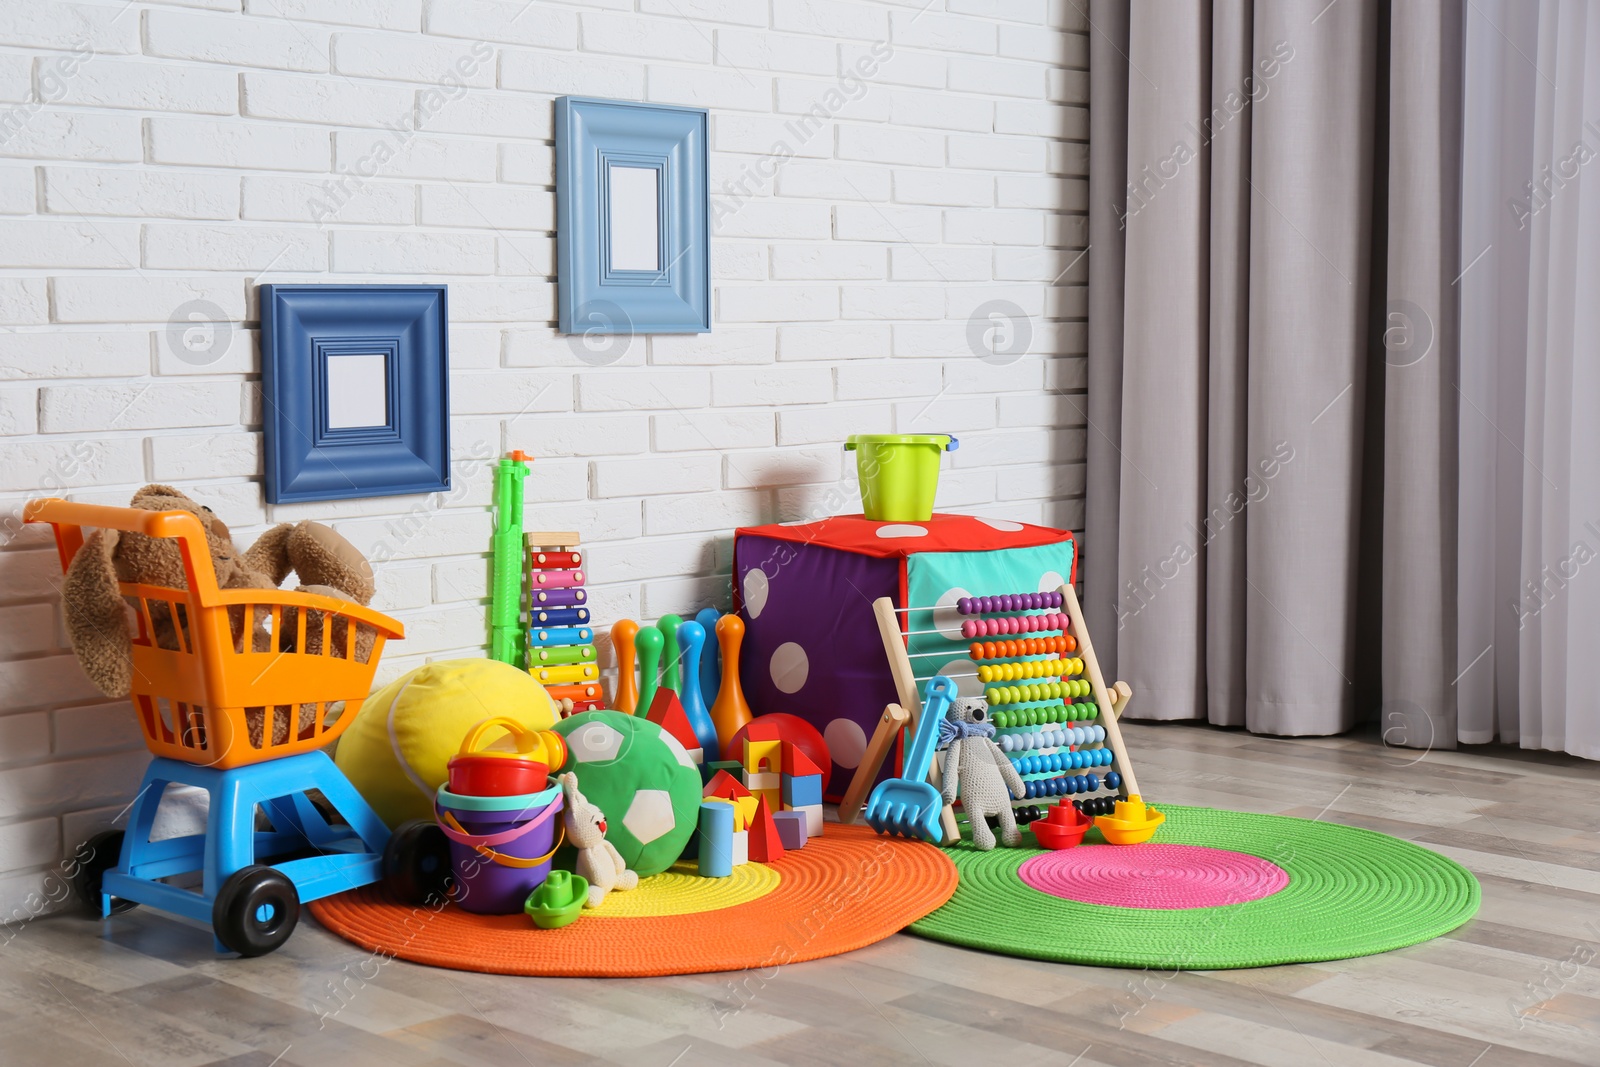 Photo of Different child toys on floor against brick wall